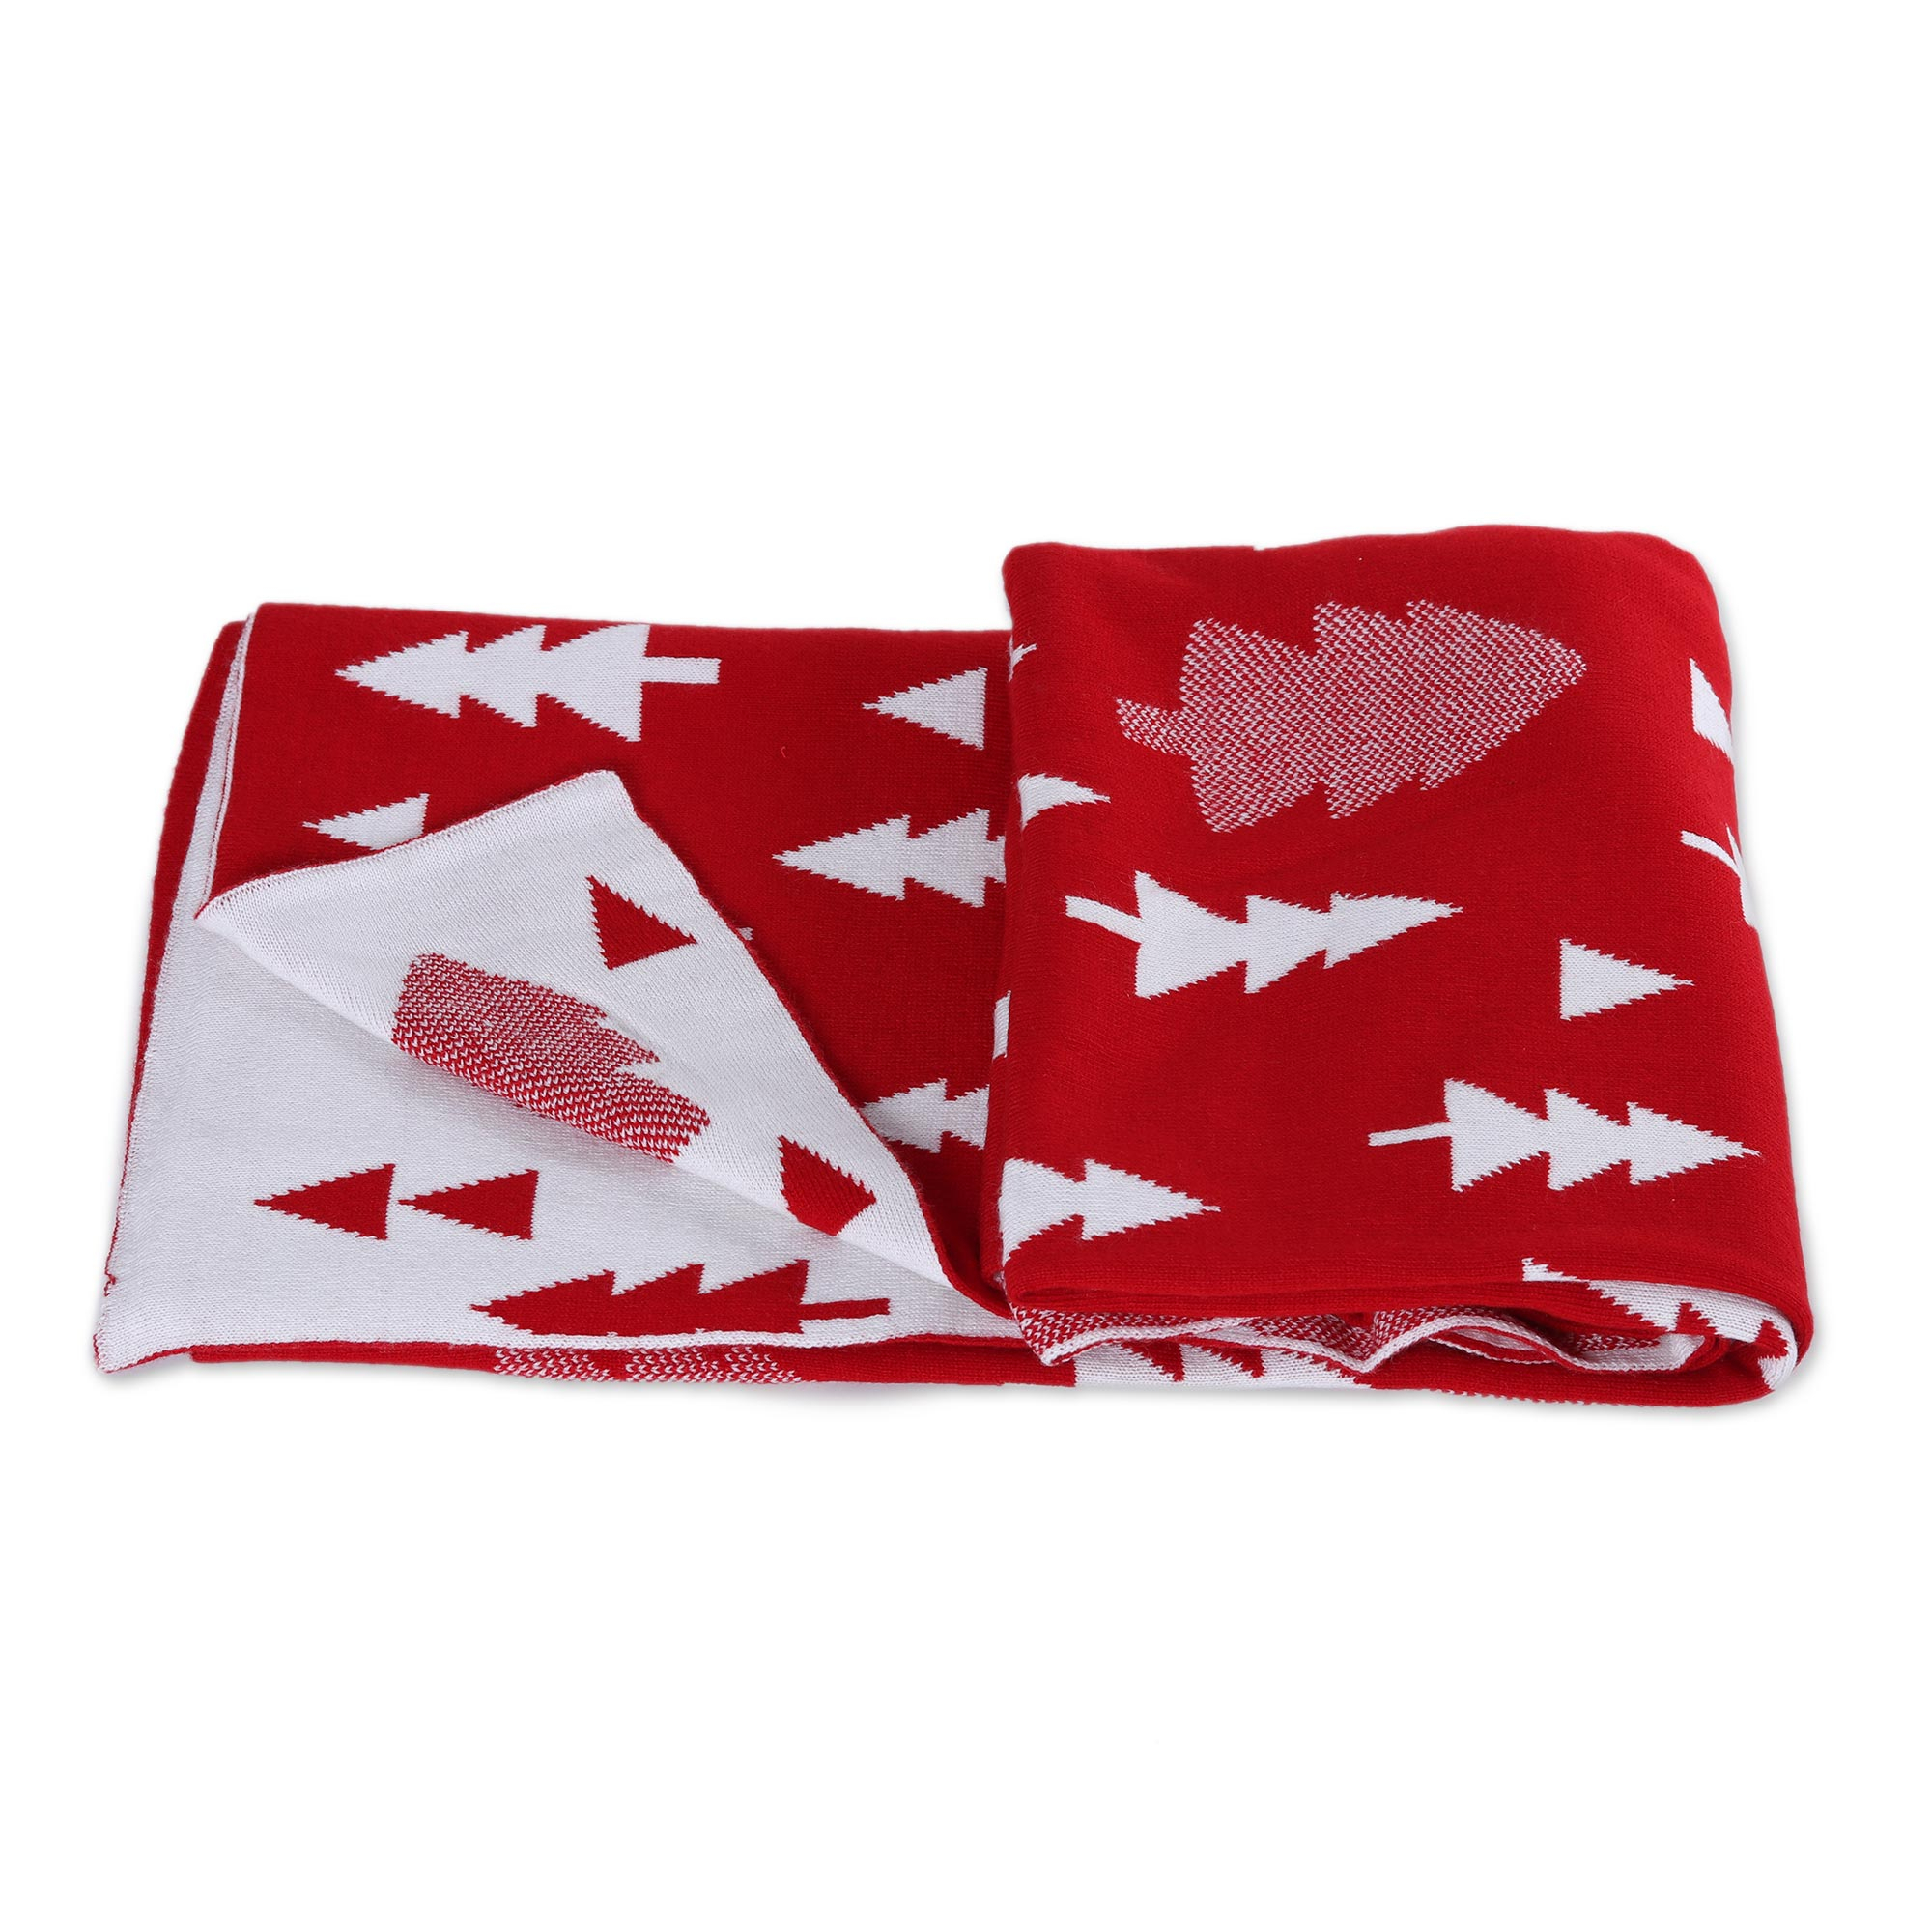 Reversible Pine Tree Knit Throw Blanket in Poppy from India - Pine Dale ...